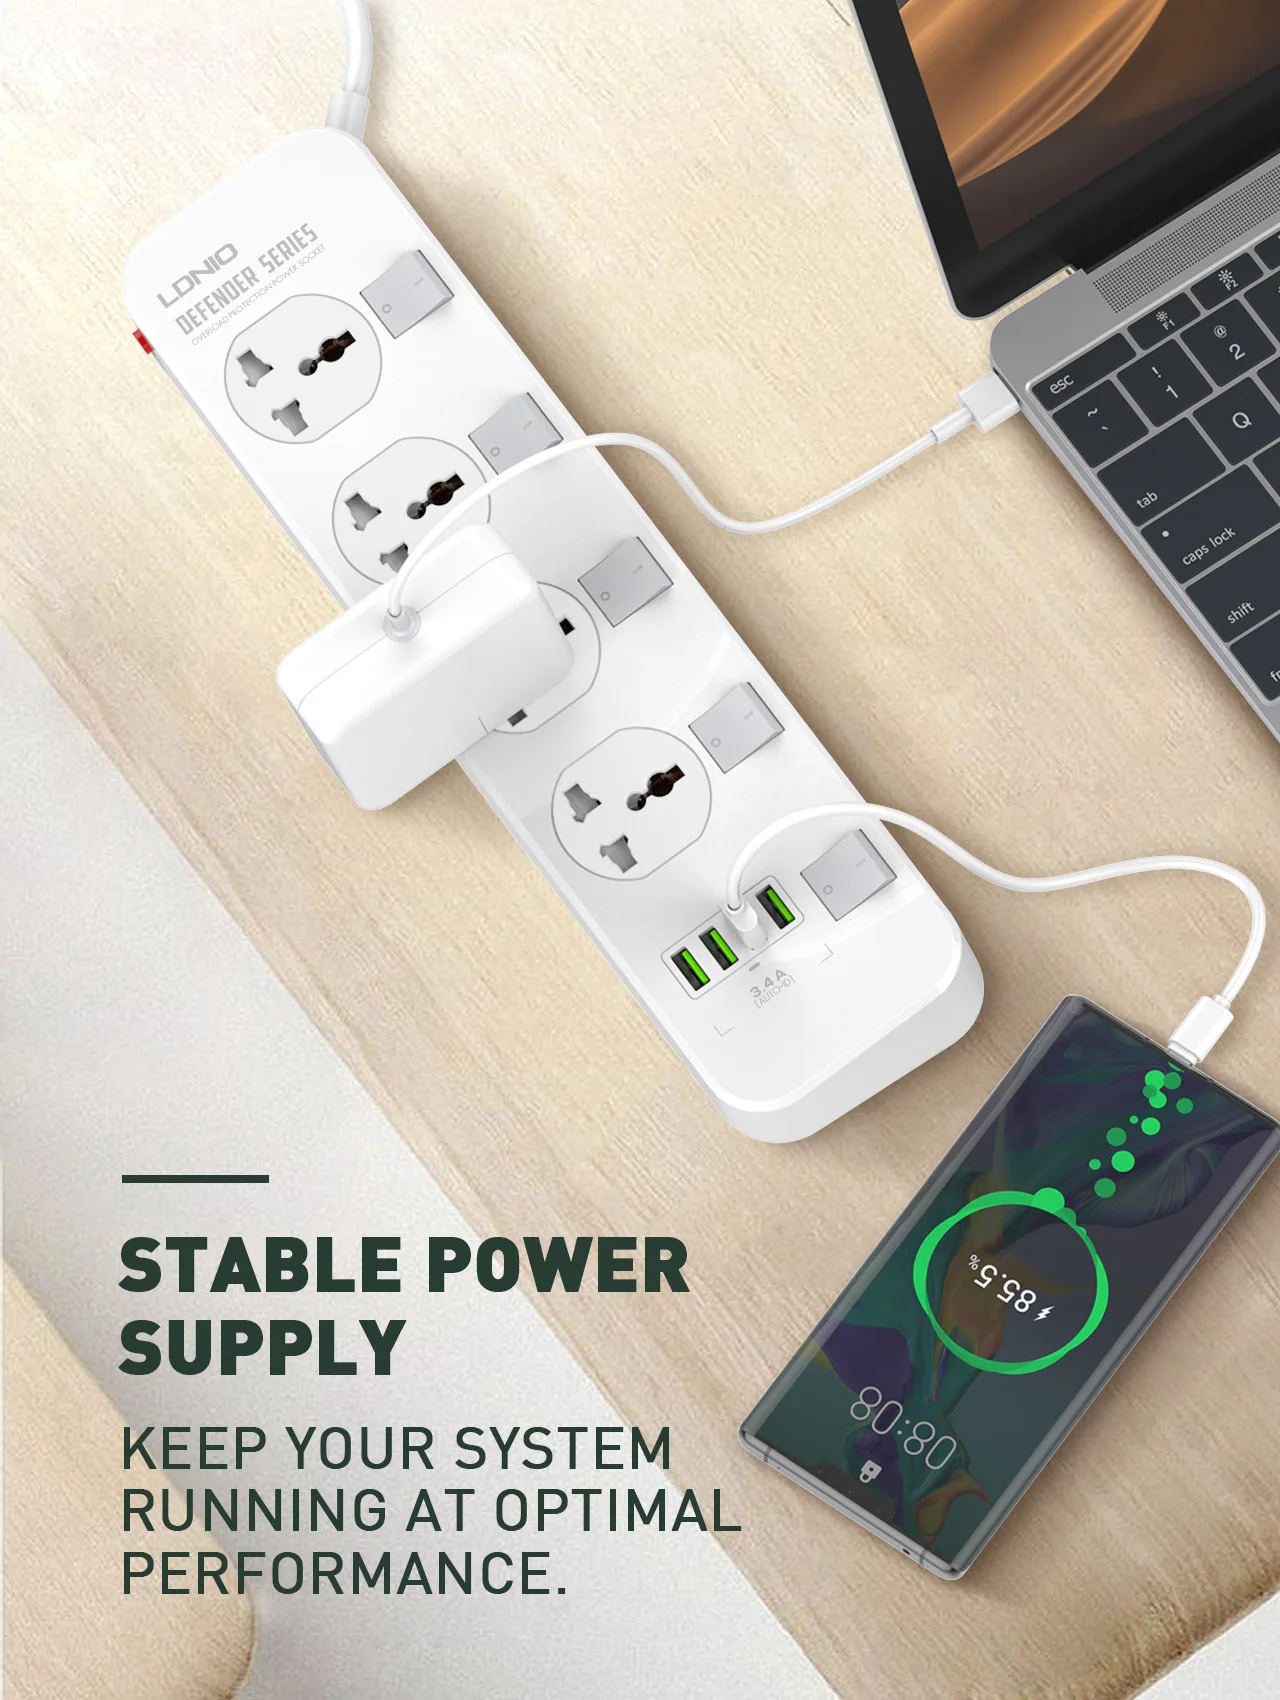 LDNIO SC4408 2500W New 5 Outlet 4 USB port Surge Protector Power Strip 7